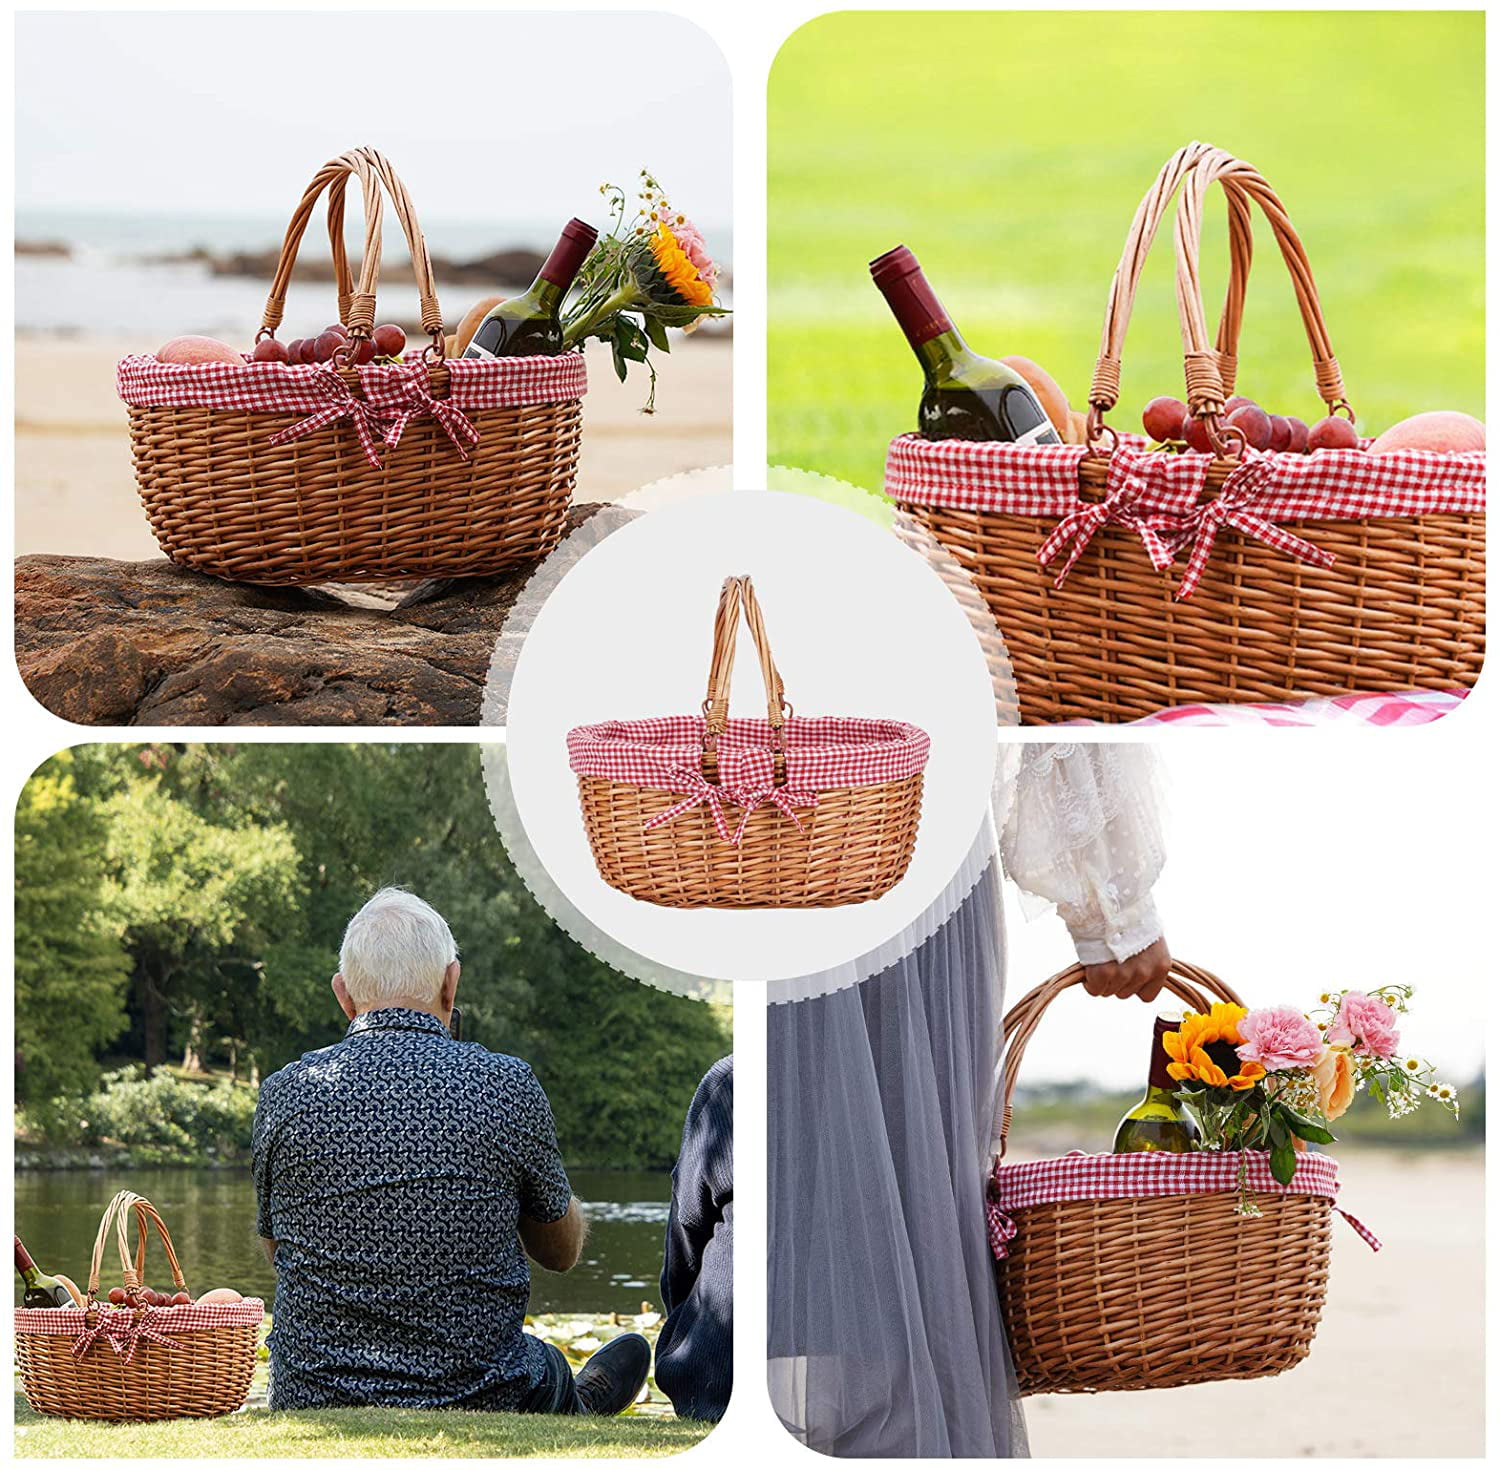 Bath Toy Kids Toy Storage Gift Packing Basket Willow Hand Woven Shopping Basket G GOOD GAIN Oval Picnic Basket with Folding Handles Grey Wicker Empty Easter Eggs and Candy Small Gift Basket